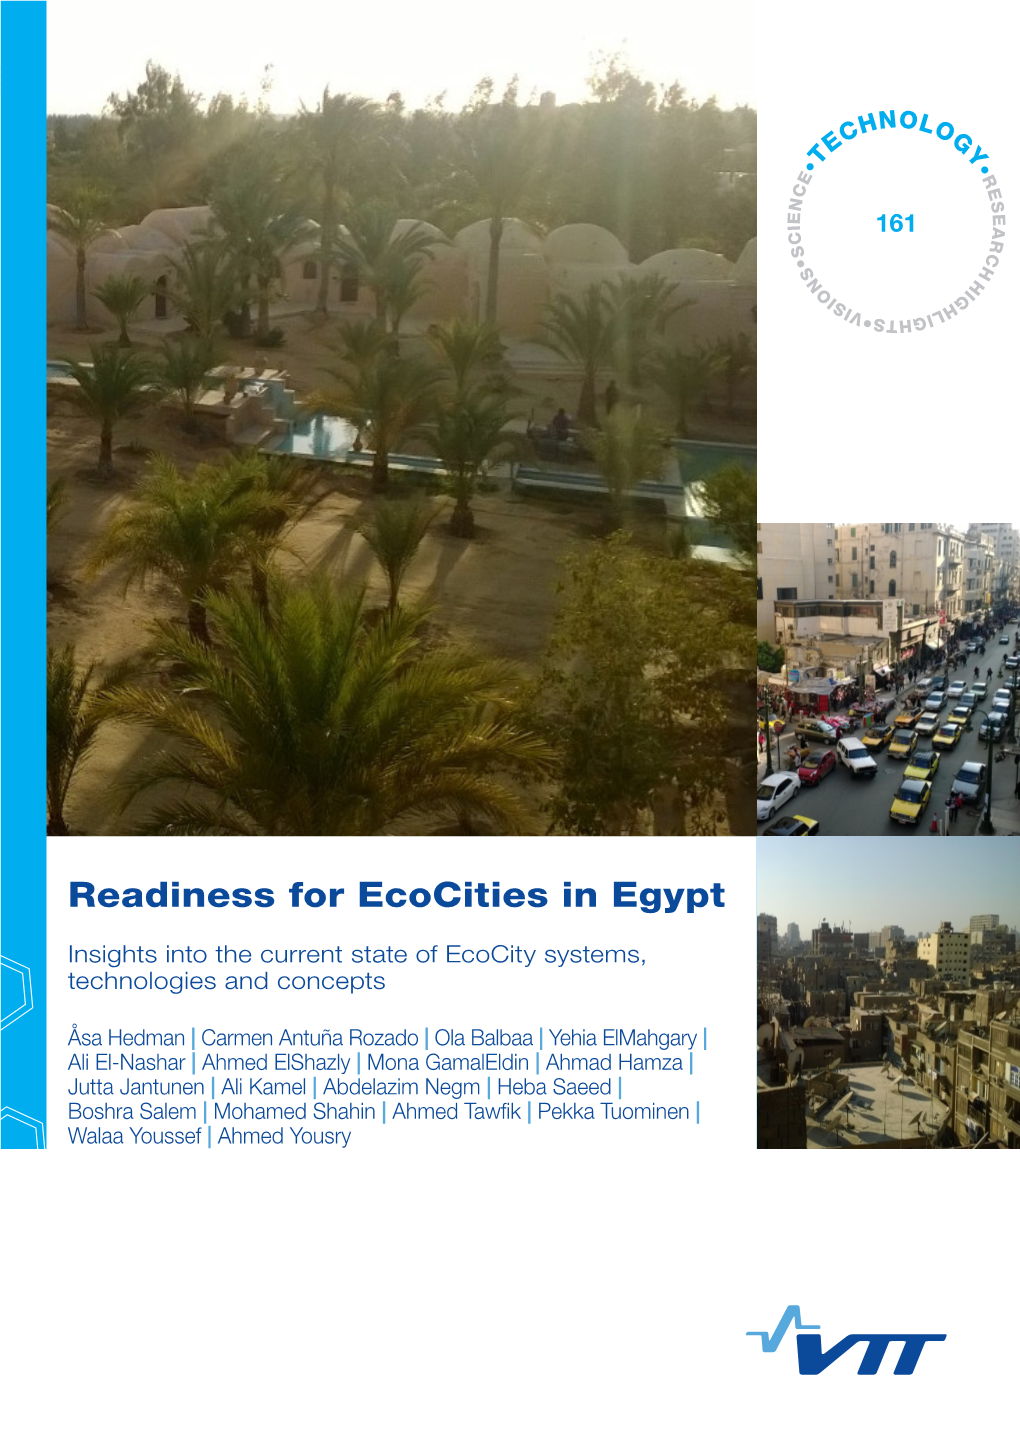 Readiness for Ecocities in Egypt. Insights Into the Current State of Ecocity Systems, Technologies and Concepts